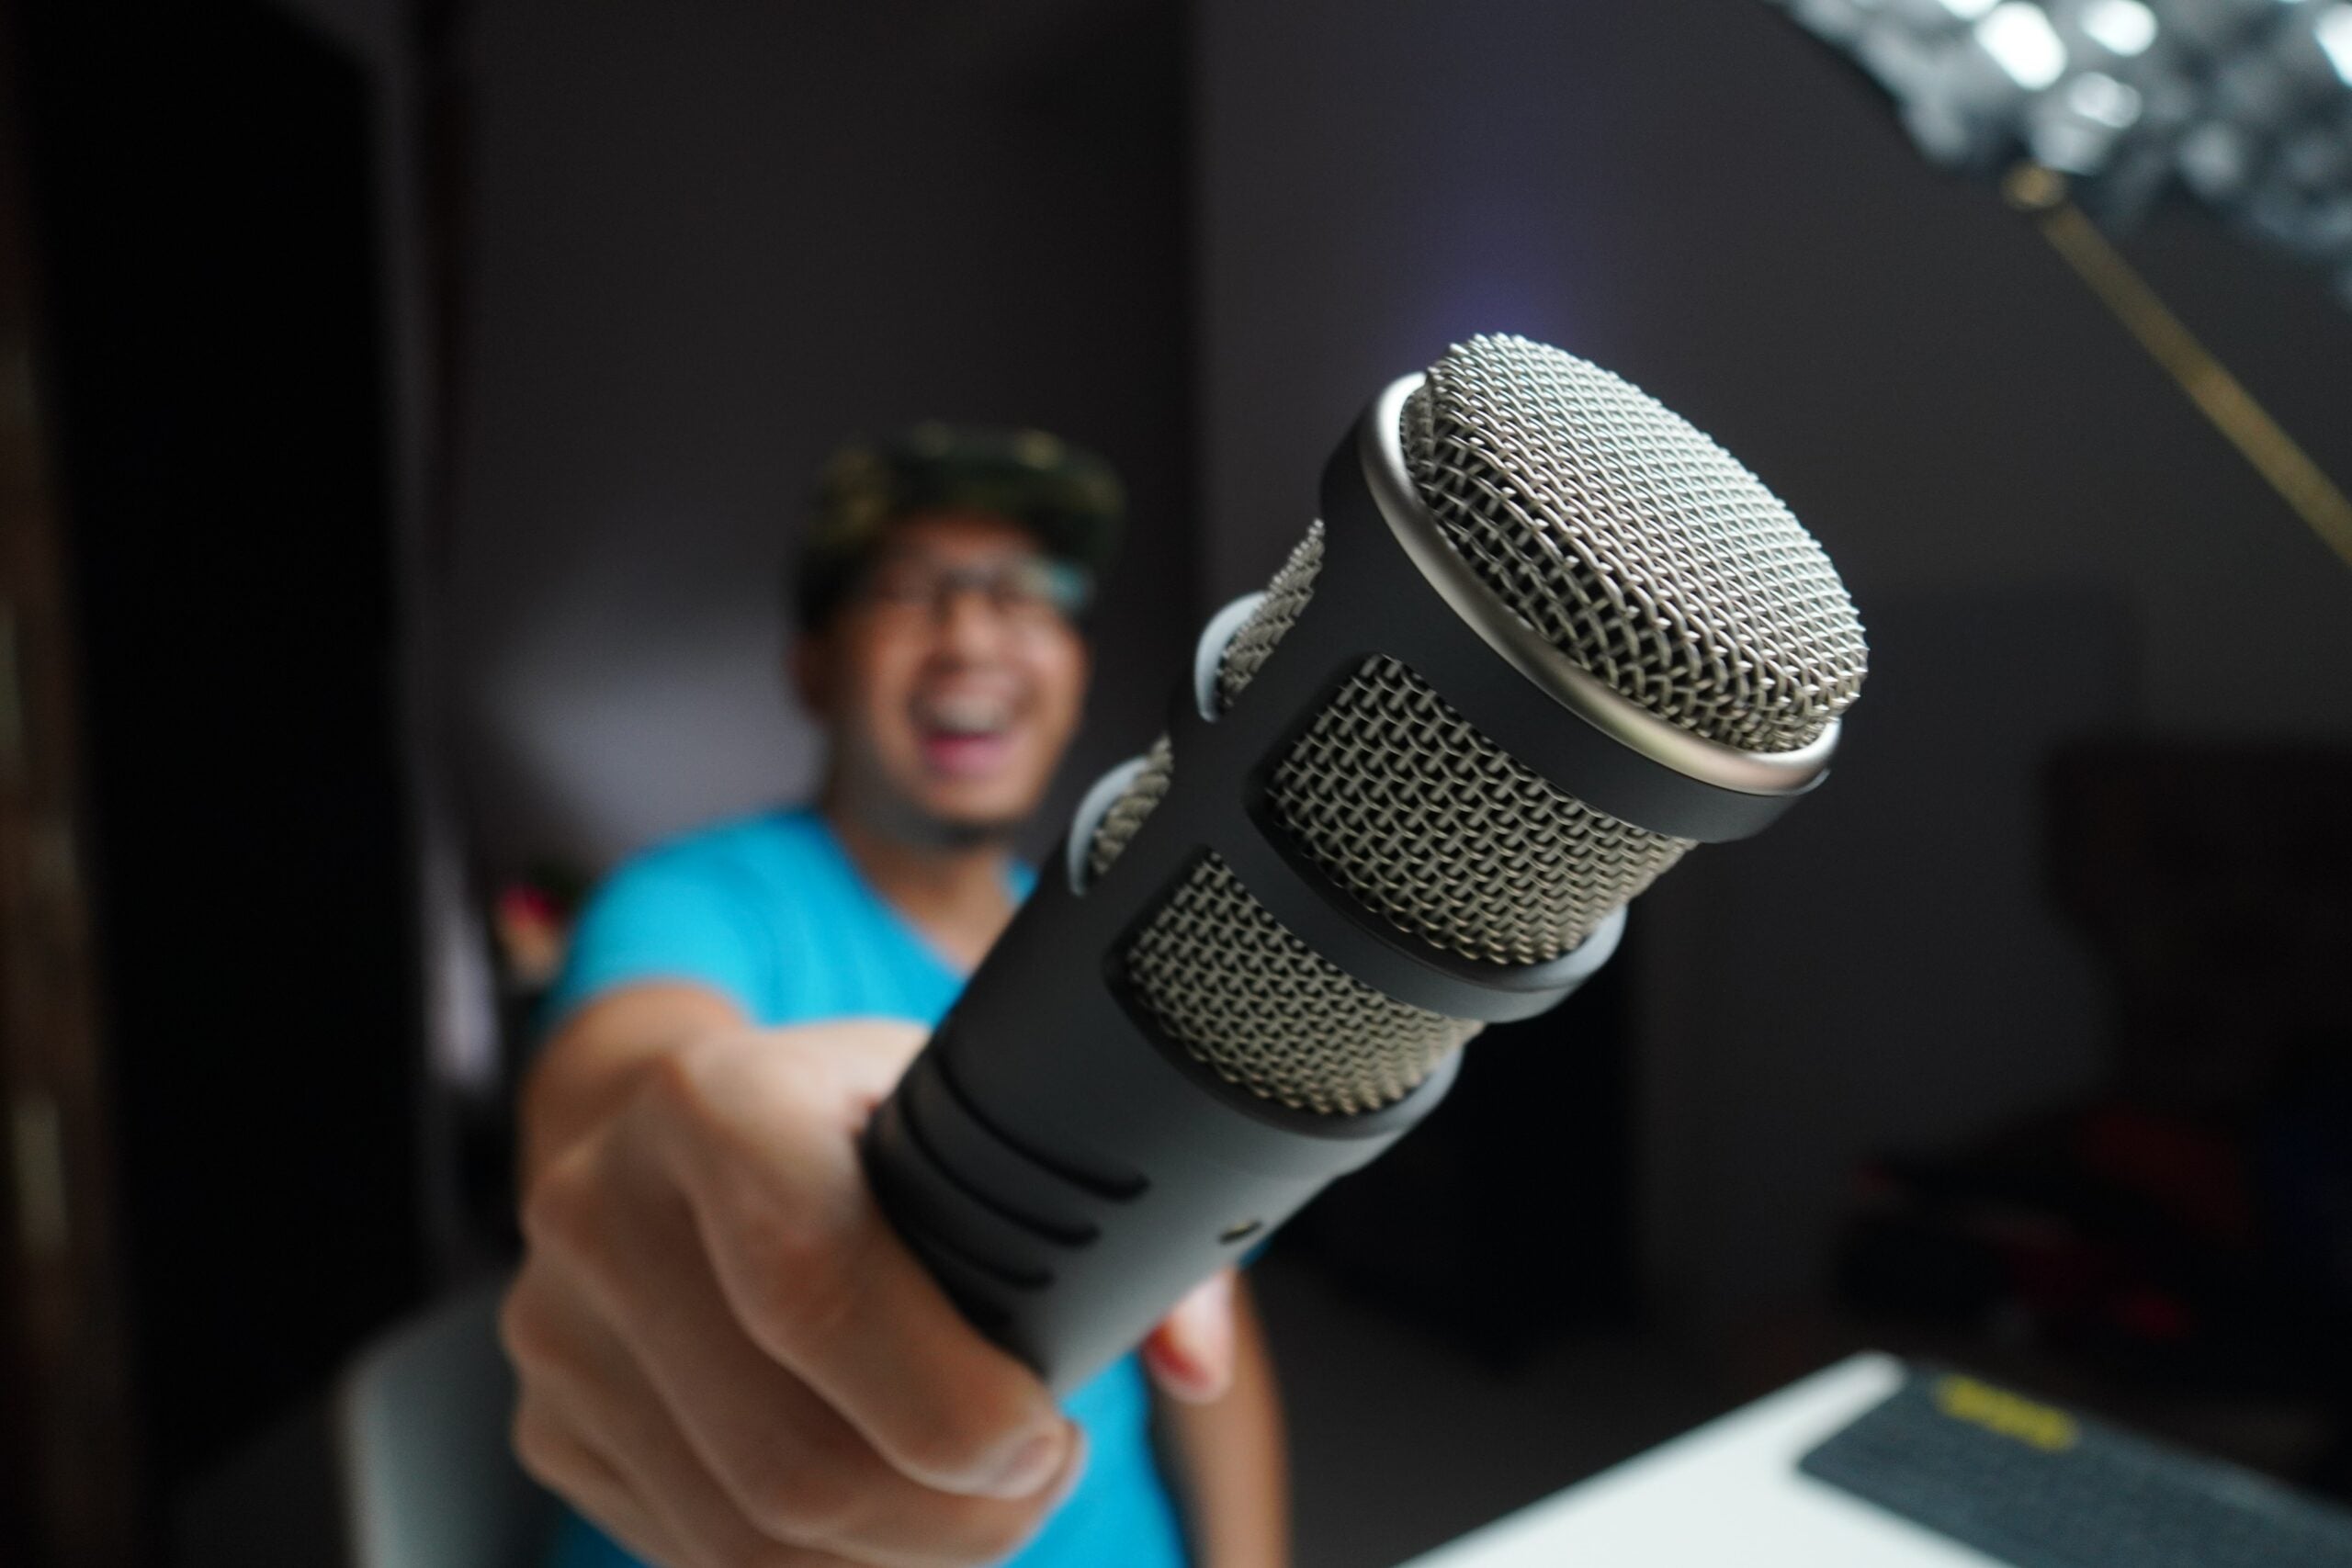 The Most Practical Live-streaming Microphones on the Market